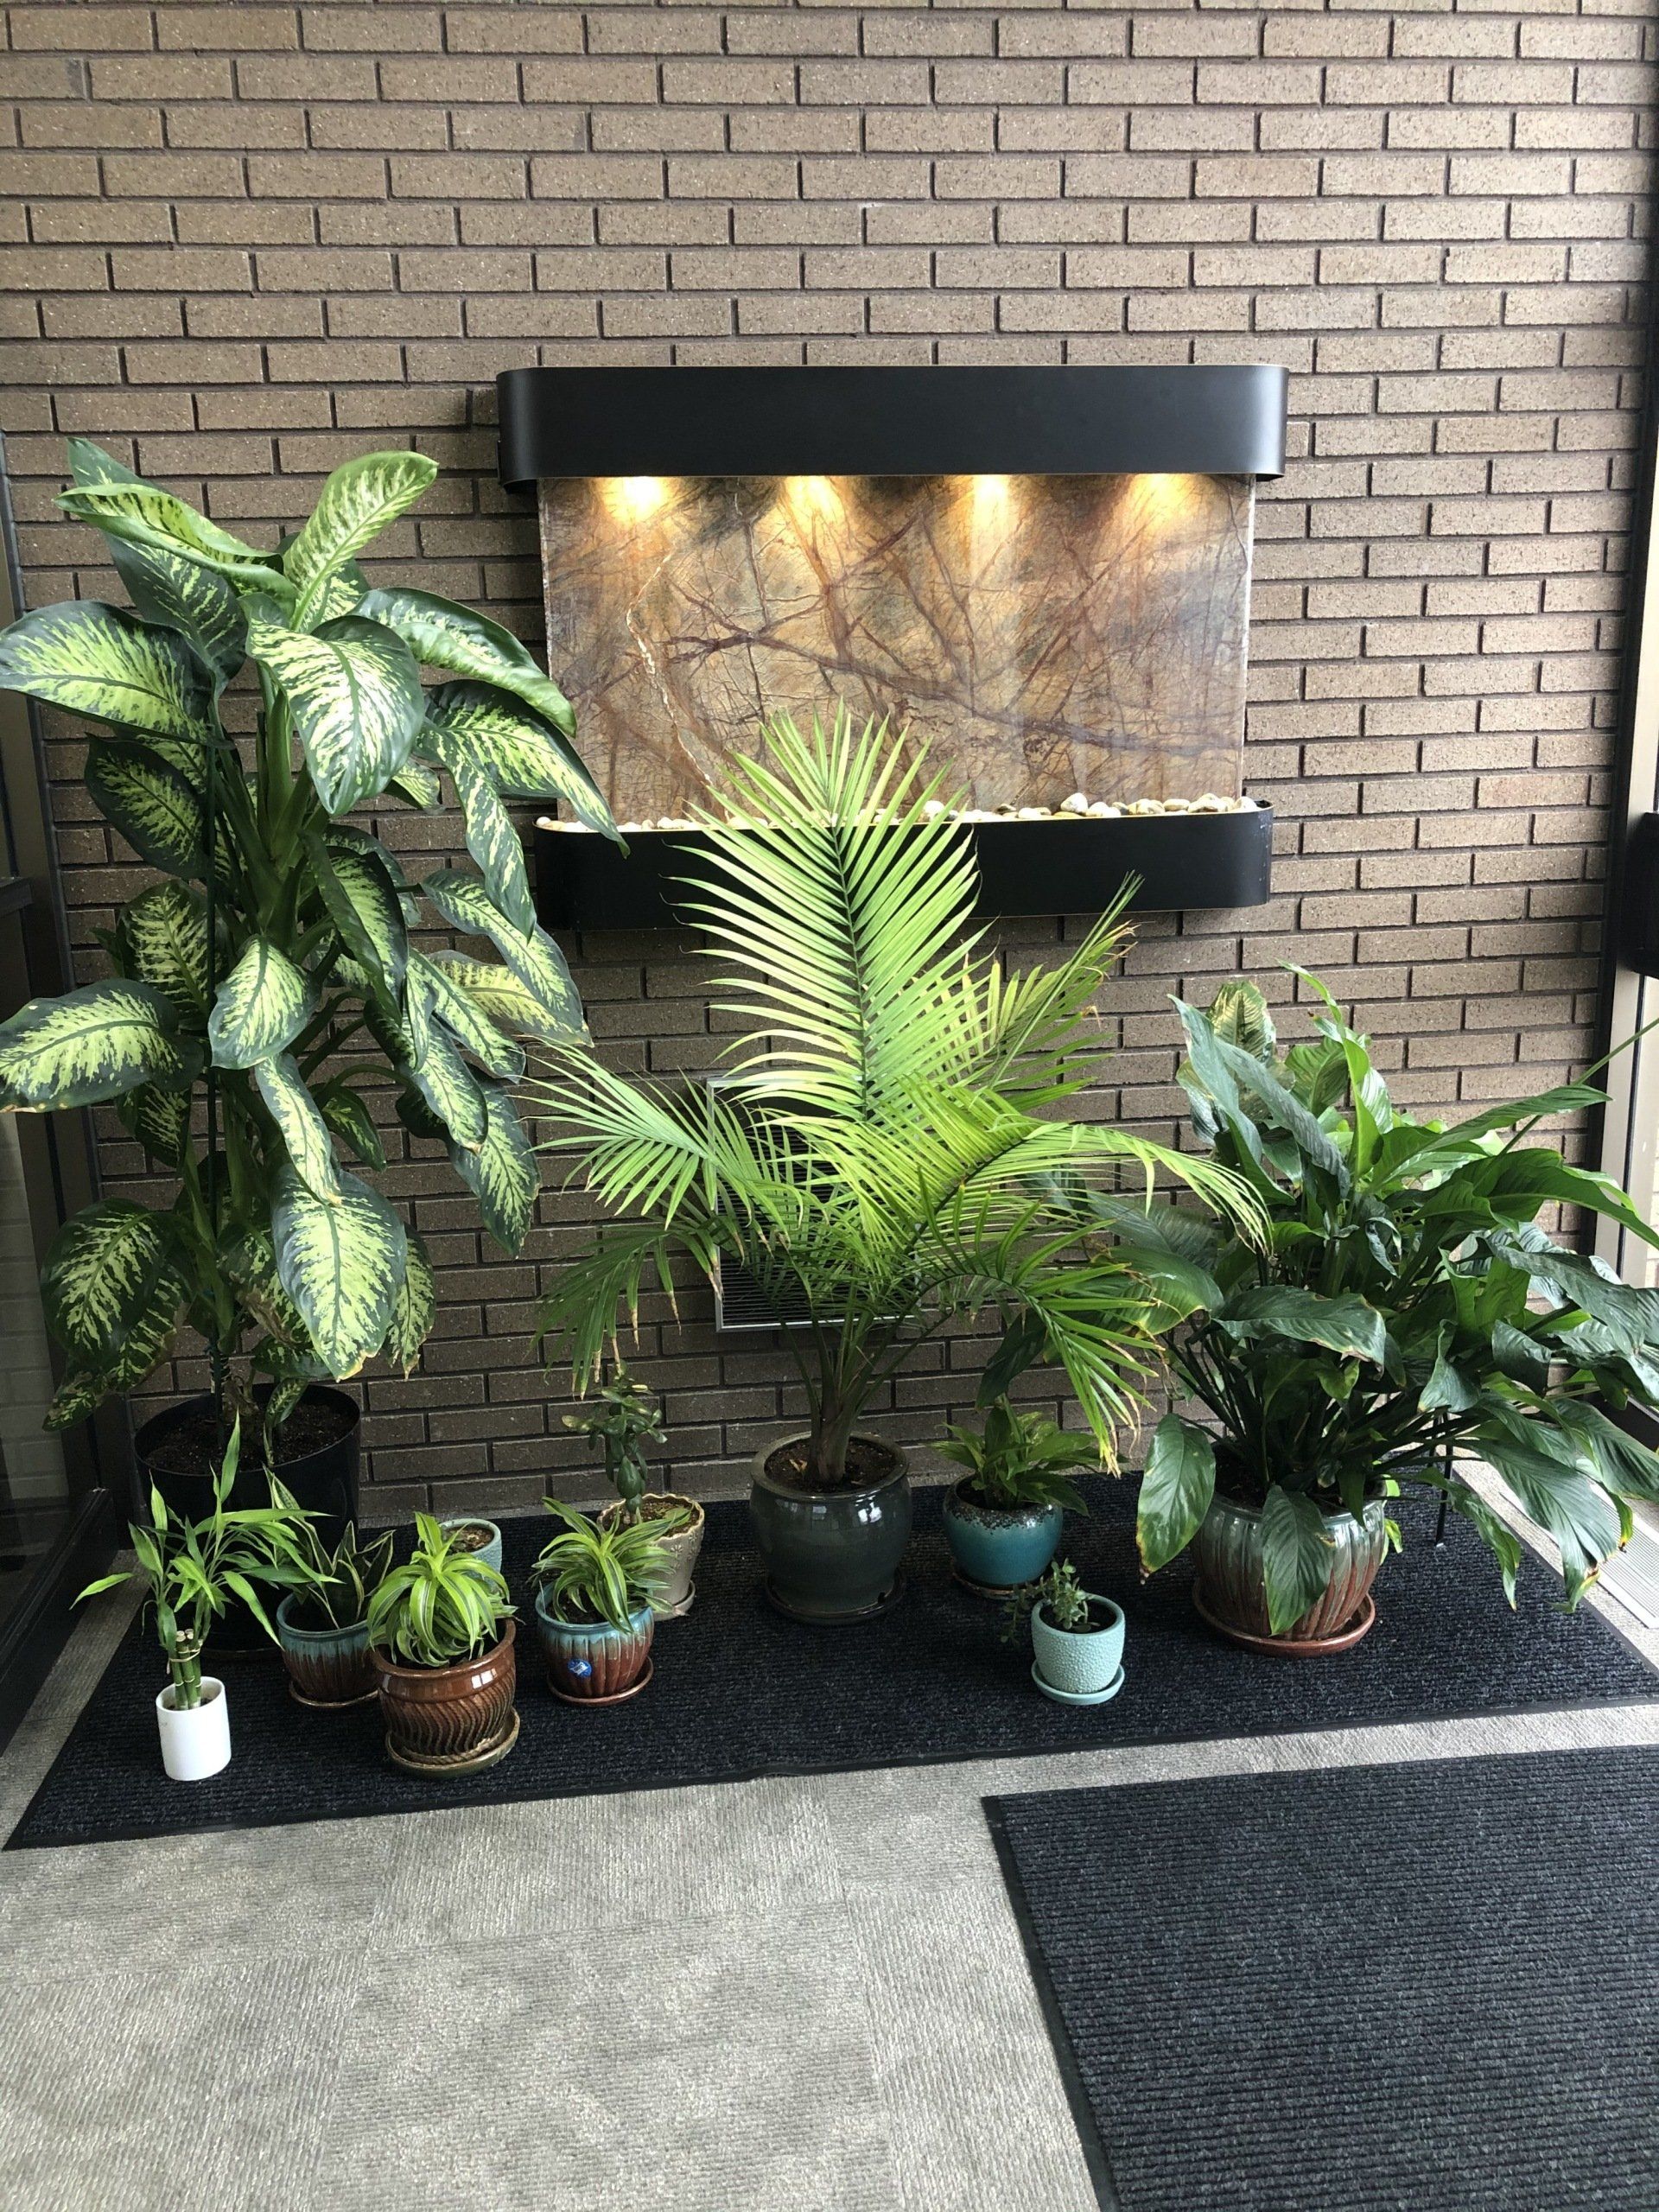 Browning Law office with beautiful plants